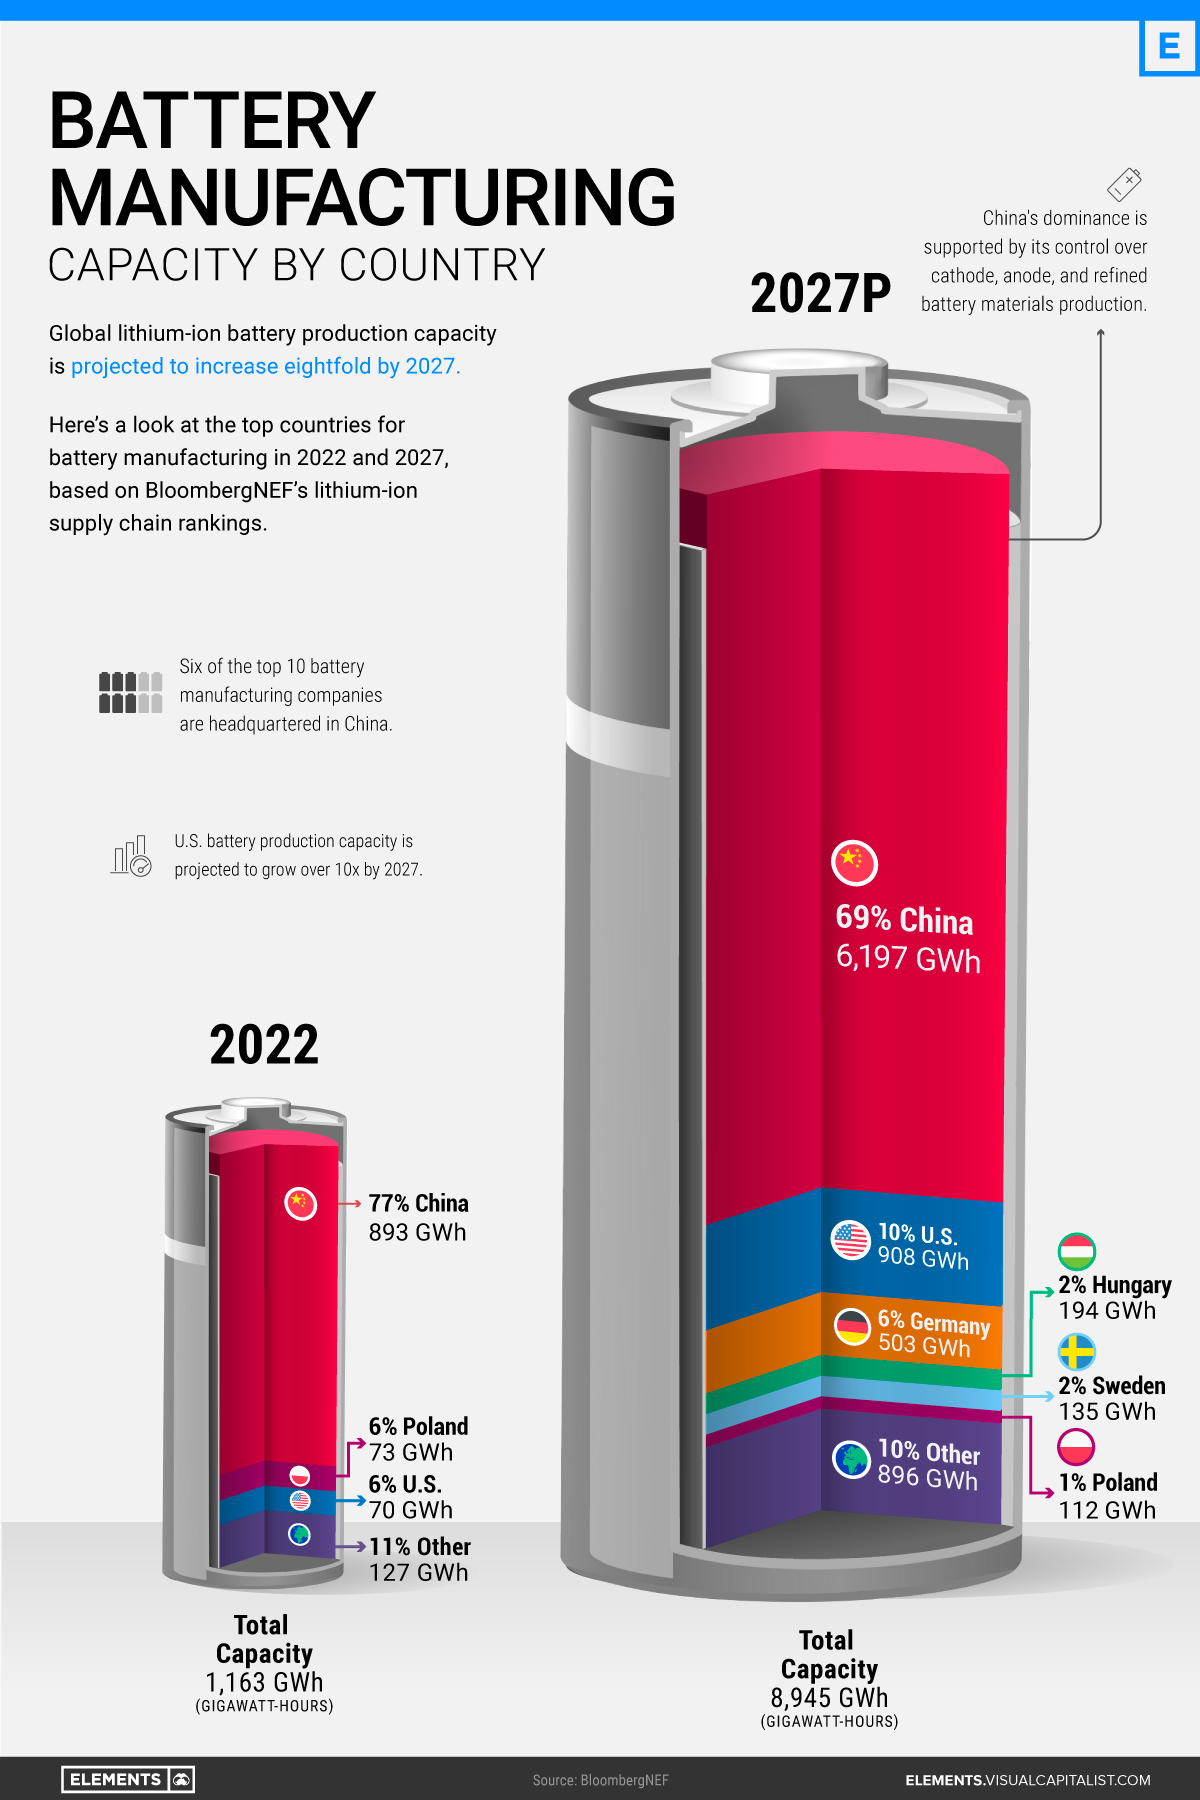 Visualizing China's in Battery Manufacturing (2022-2027)